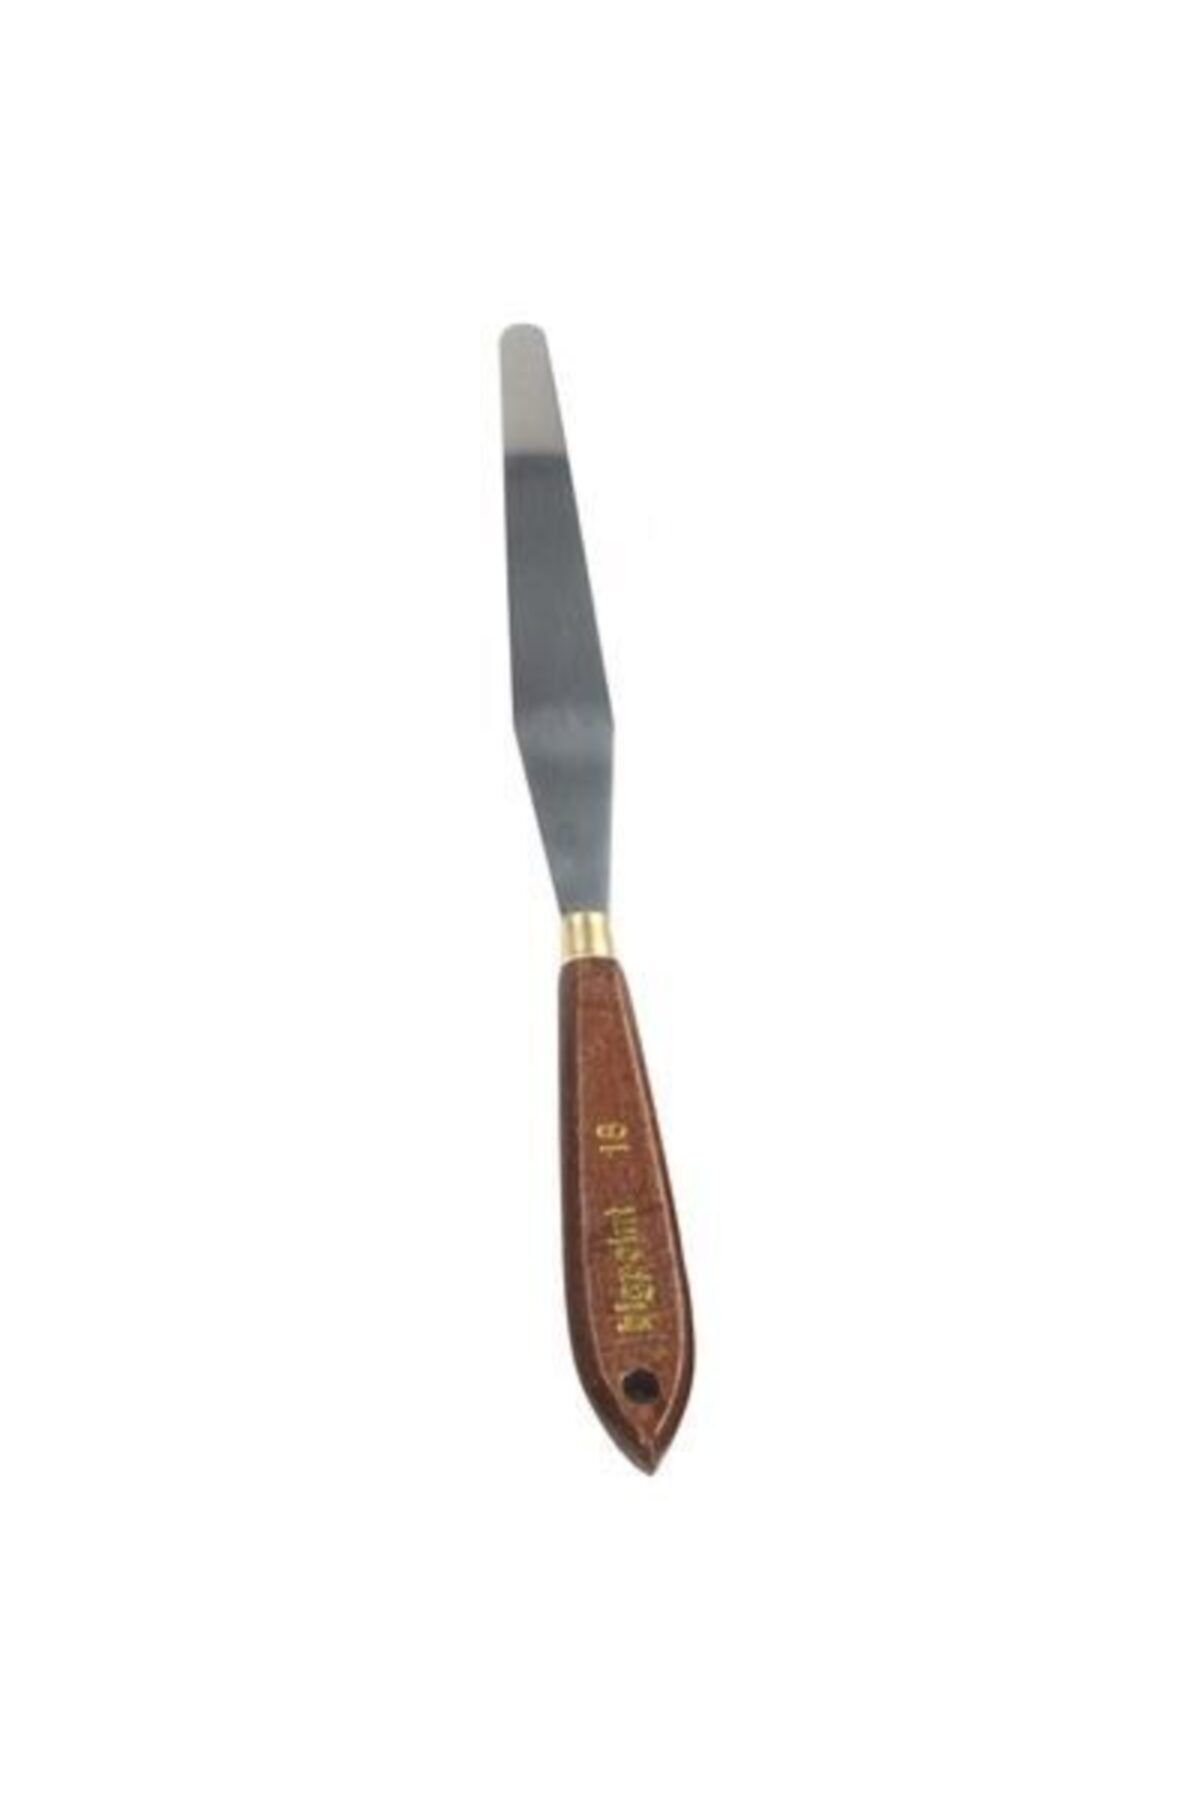 Bigpoint Metal Spatula No: 18 (painting Knife)